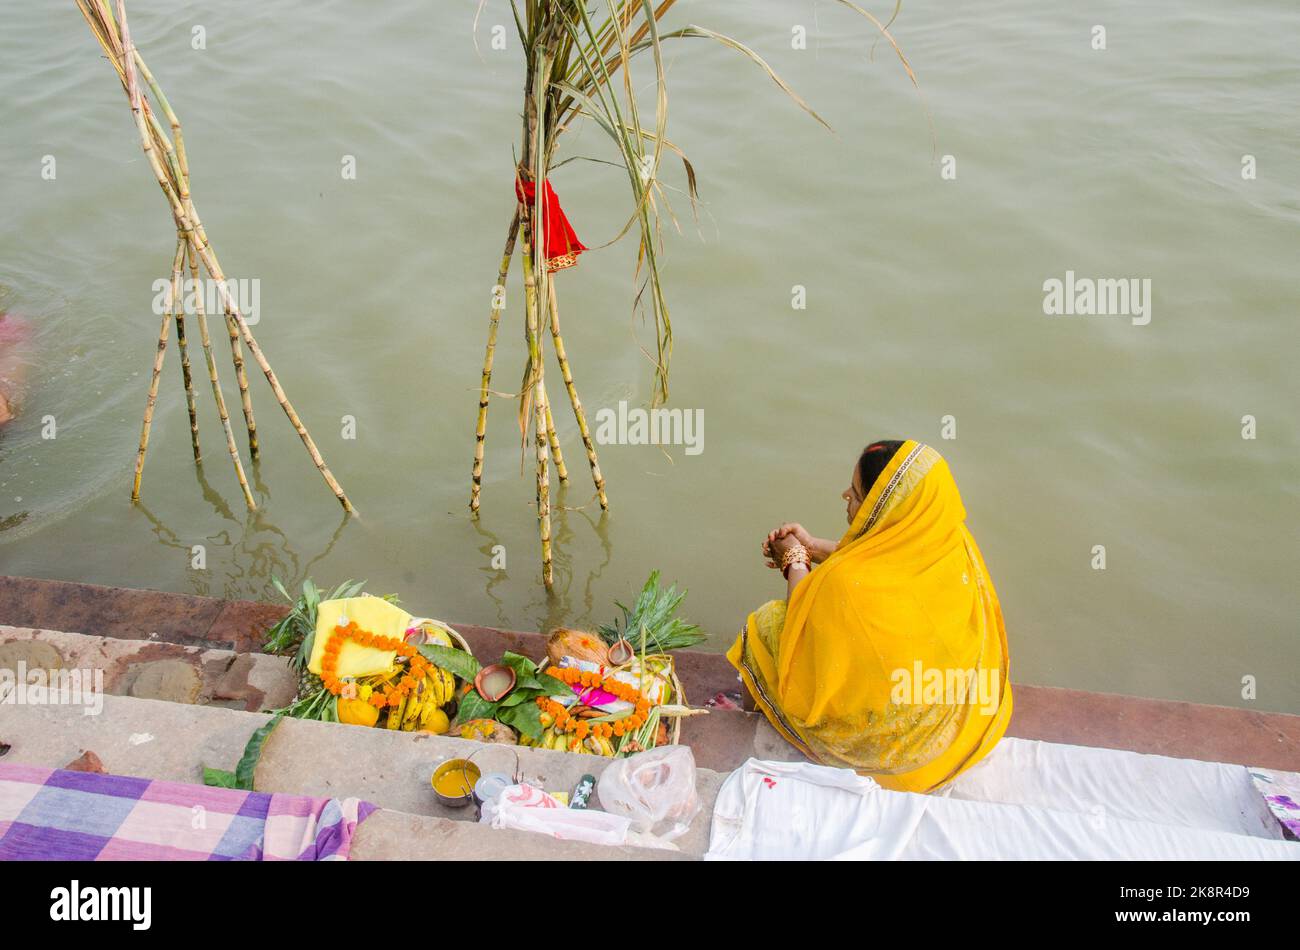 Unidentified Indian men and women pray and devote for Chhath Puja festival on Ganges river side in Varanasi, India. Stock Photo